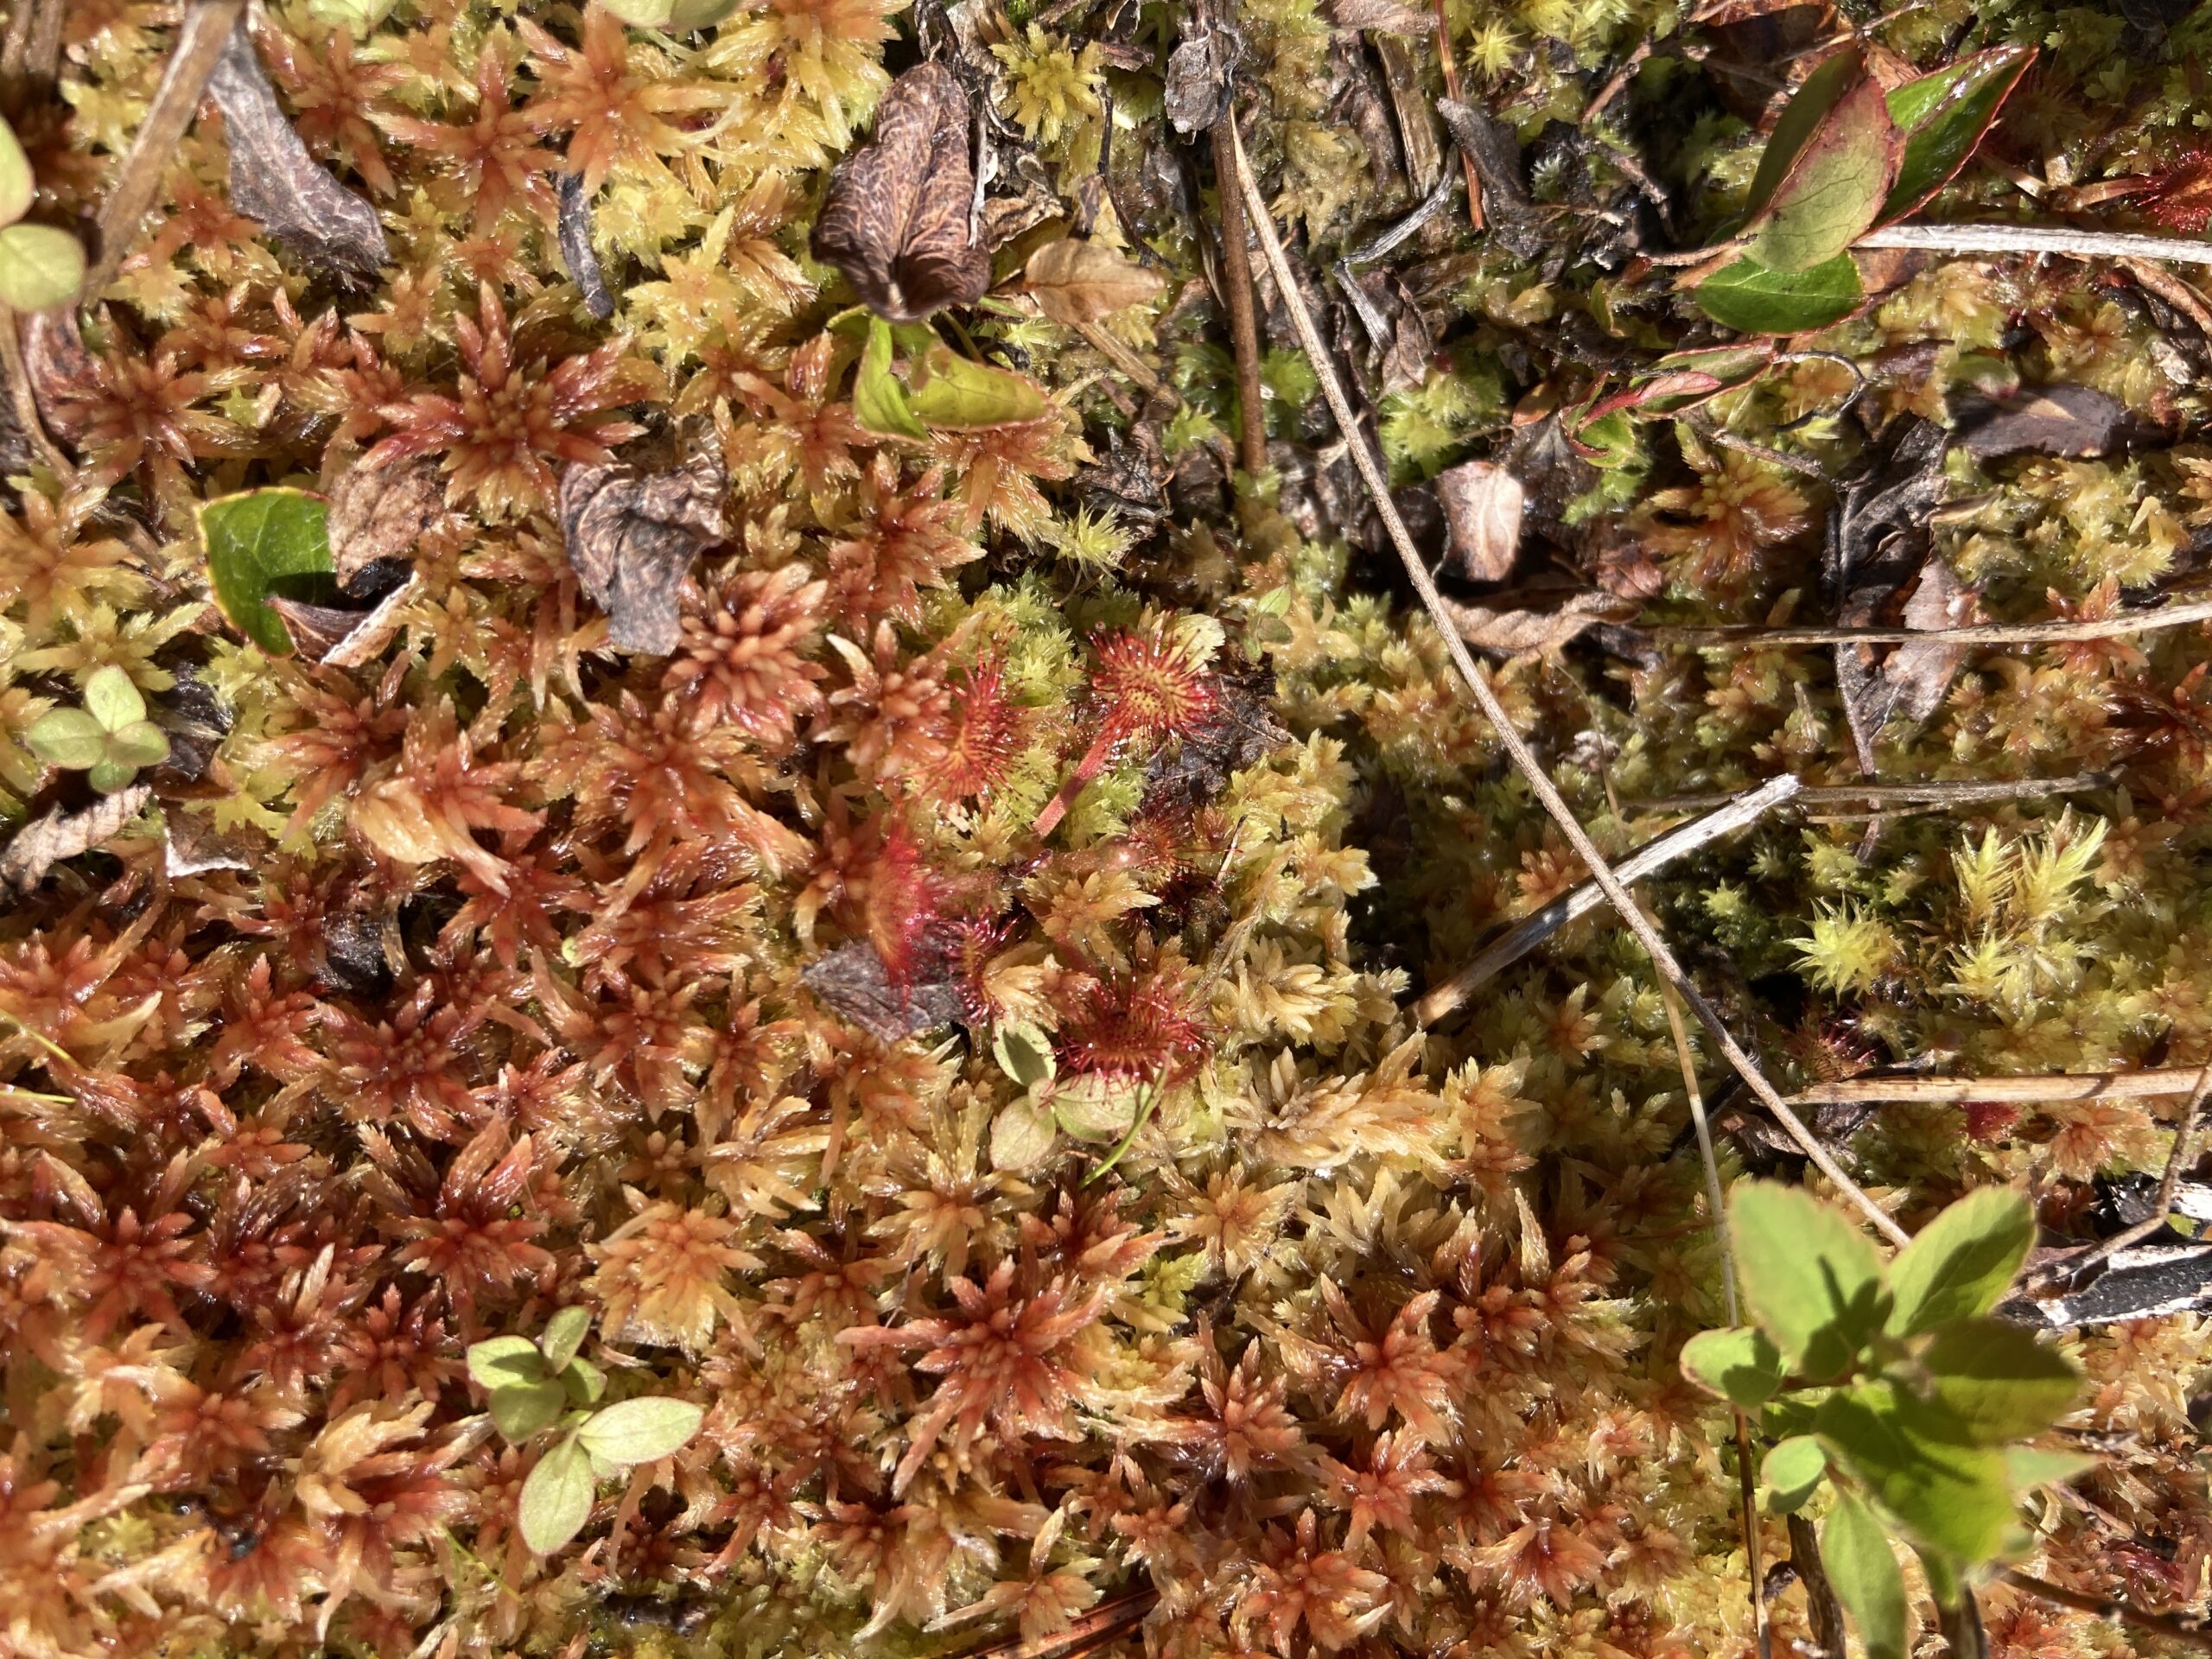 This is a closeup of spagnum moss, but it has turned red, possibly from lack of moisture.